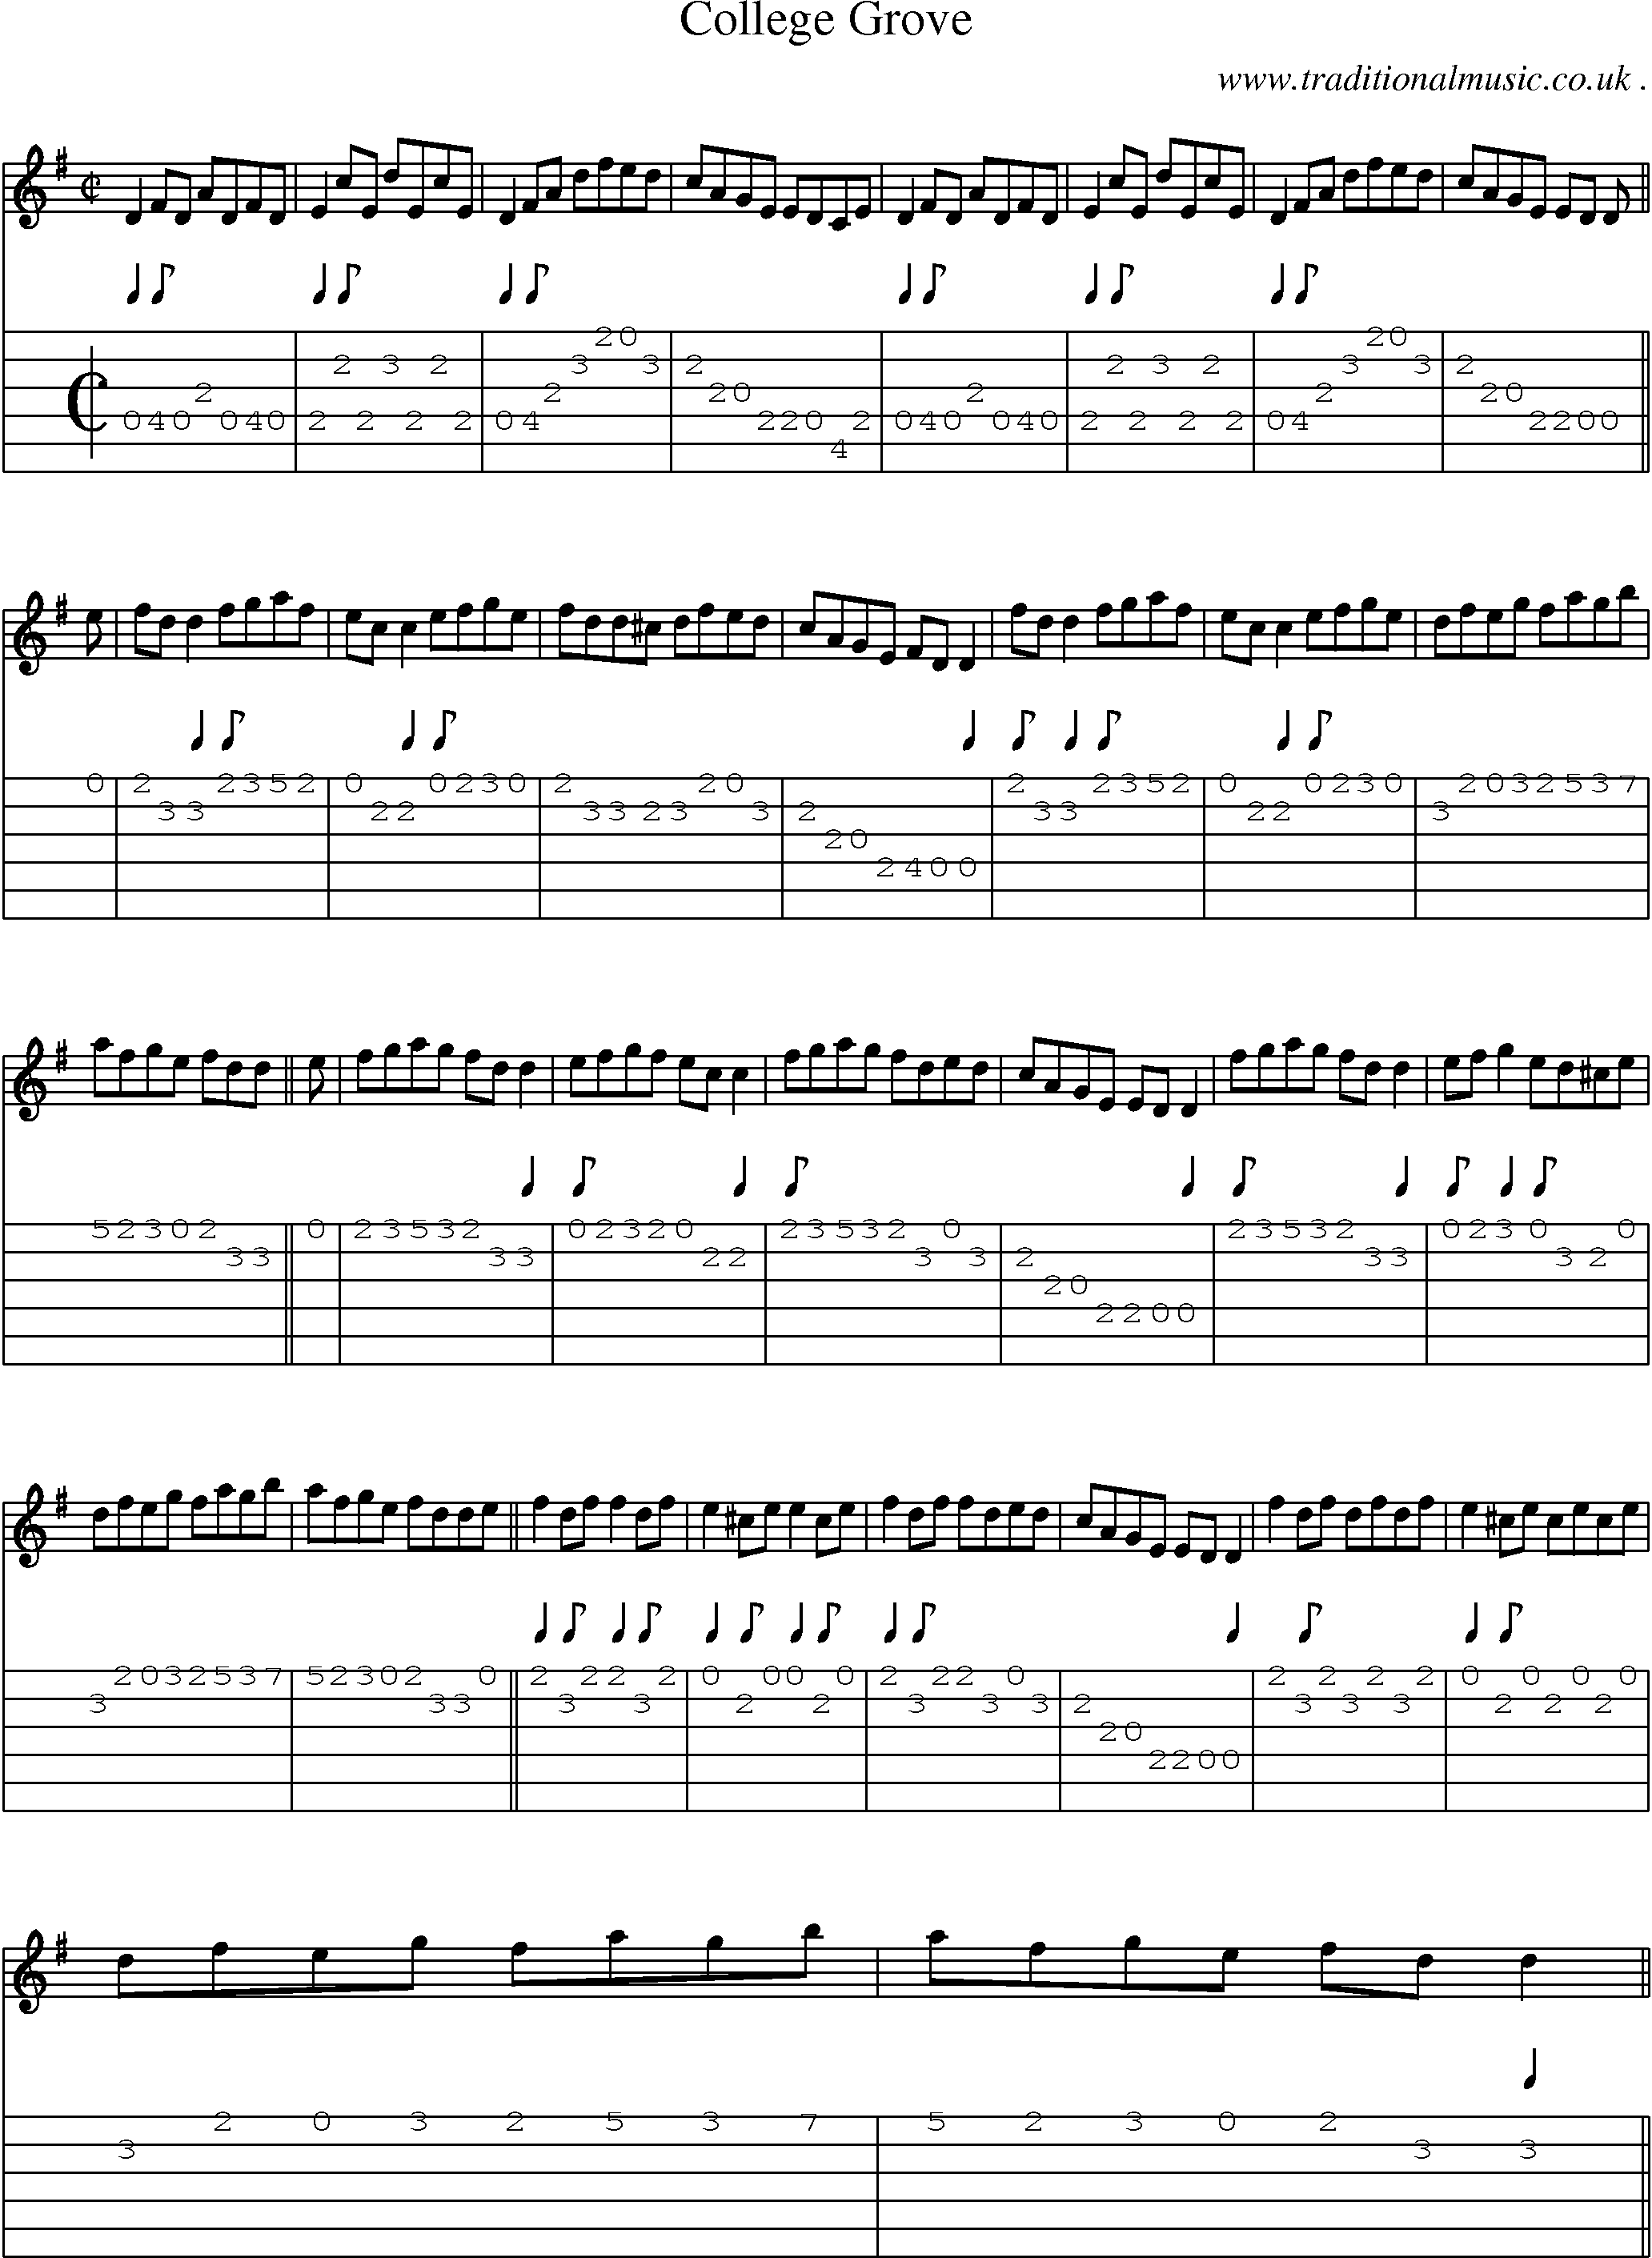 Sheet-Music and Guitar Tabs for College Grove